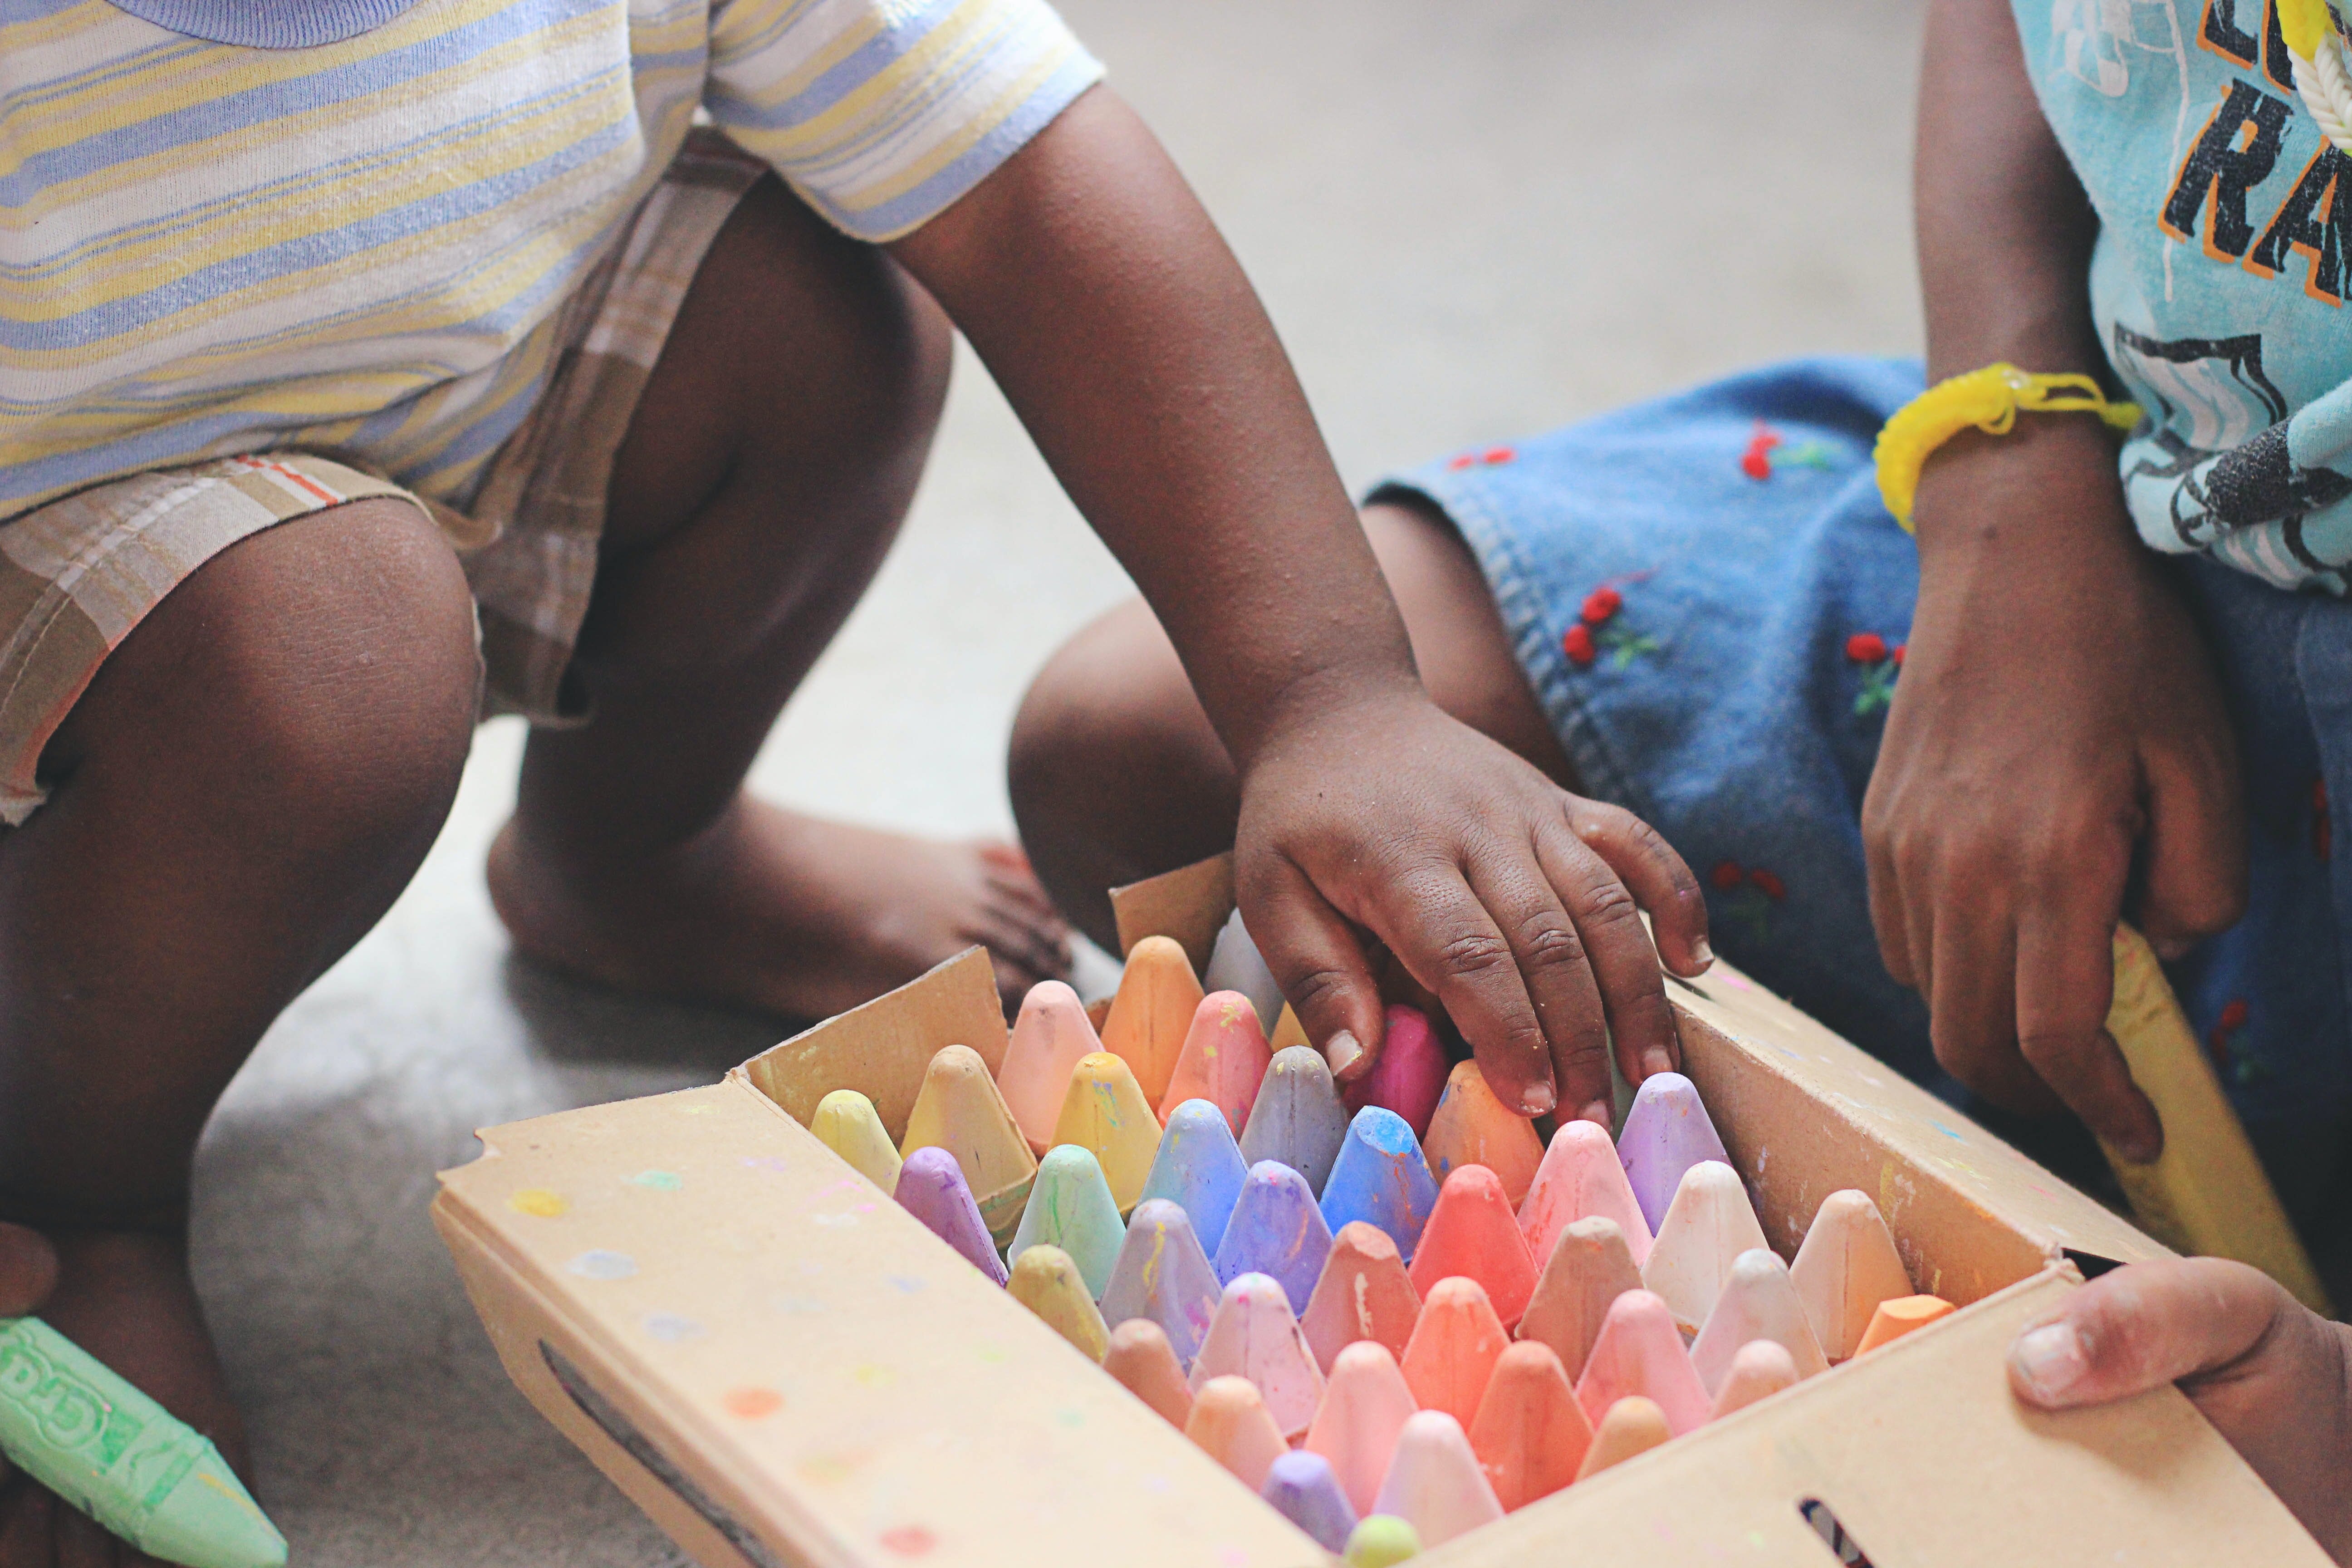 The GISD offers a vareity of free early childhood programs for Genesee County families.